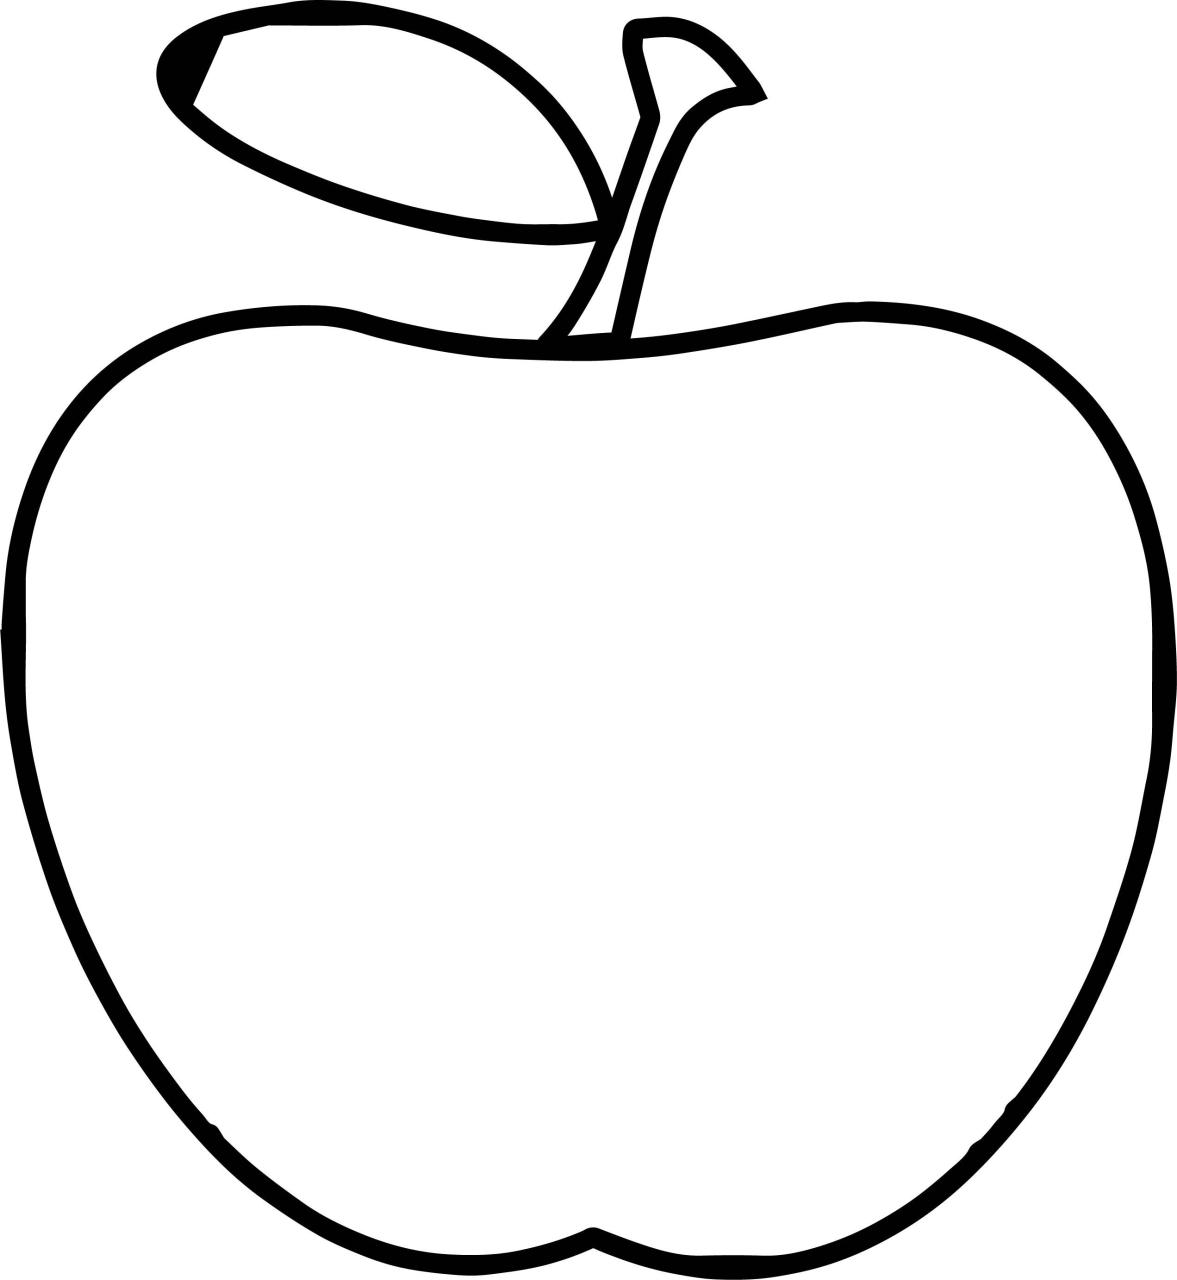 Teacher Apple Apple Simple Coloring Page Easy coloring pages, Apple